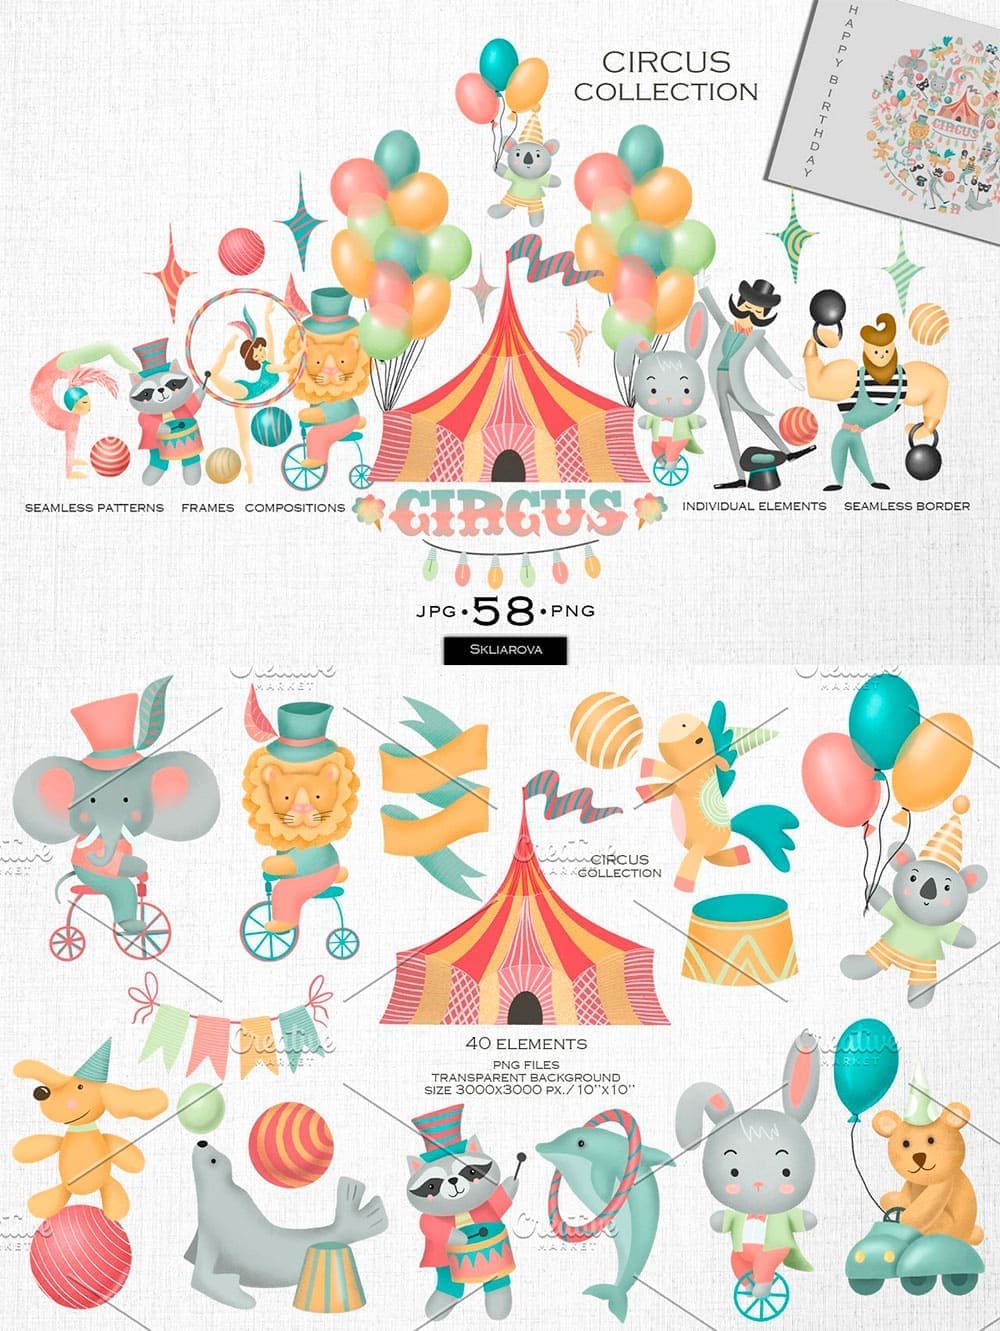 Circus collection, picture for pinterest.